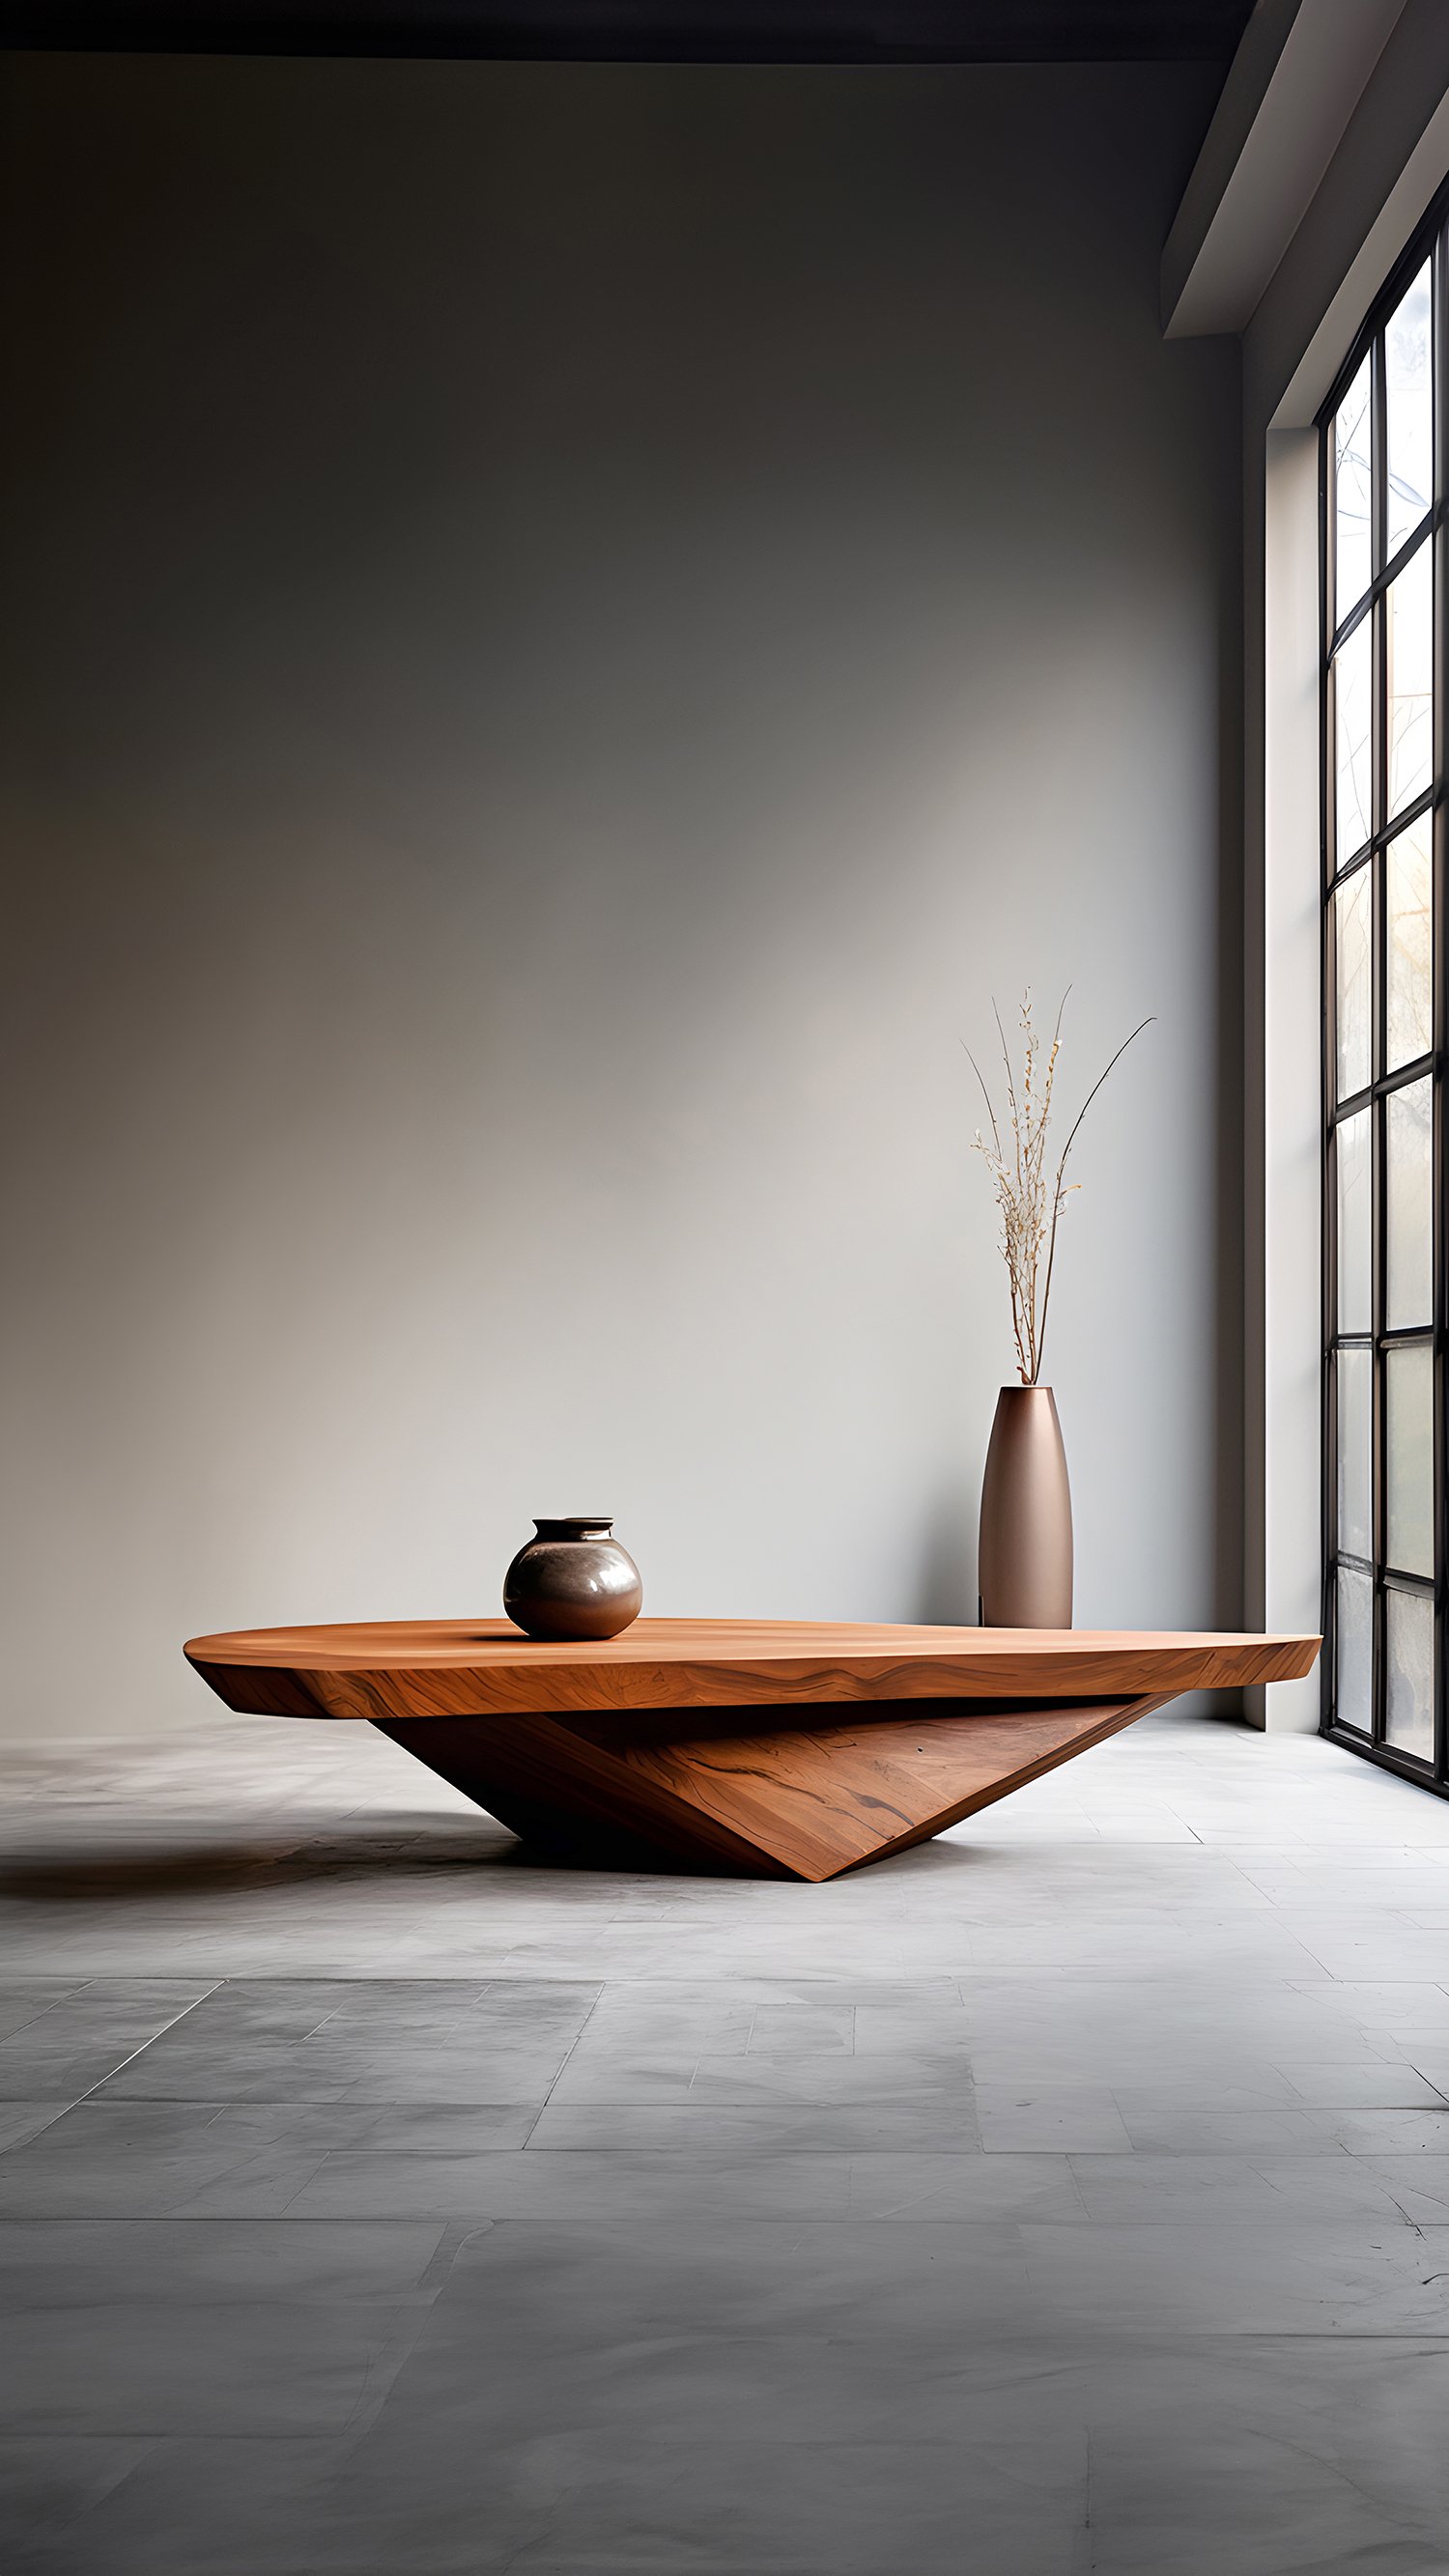 Sculptural Coffee Table Made of Solid Wood, Center Table Solace S24 by Joel Escalona — 6.jpg